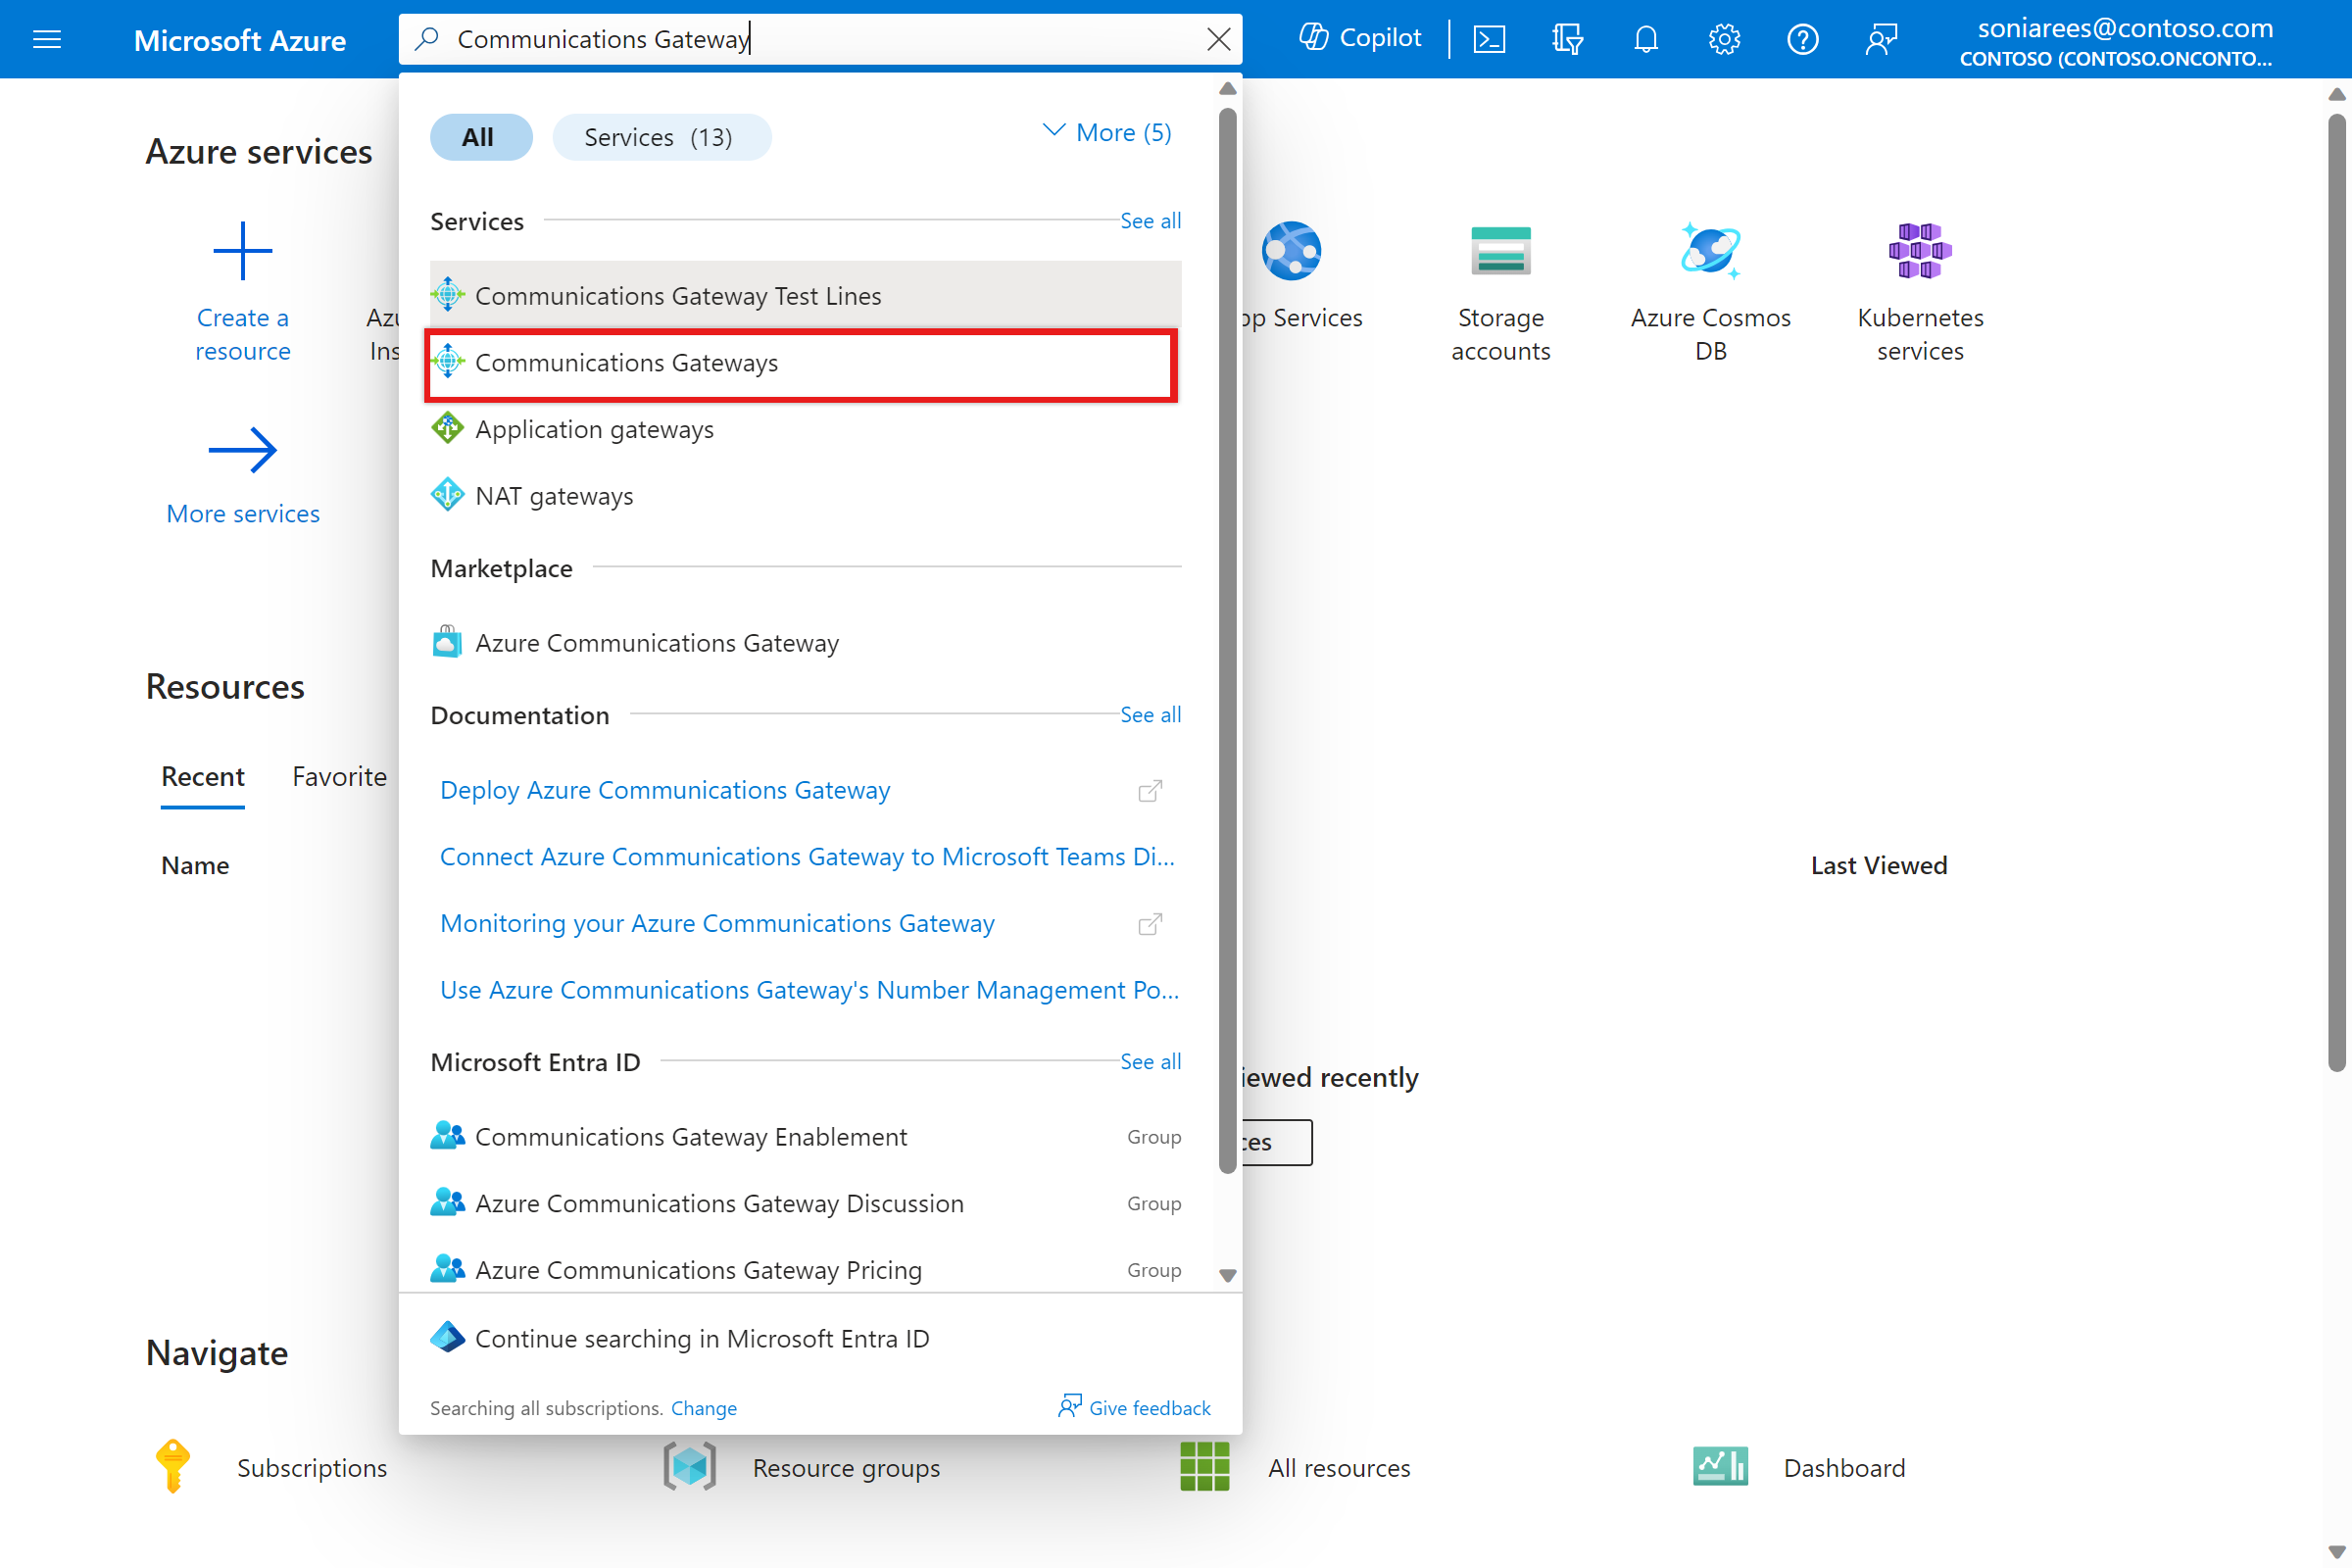 Screenshot of the Azure portal. It shows the results of a search for Azure Communications Gateway.